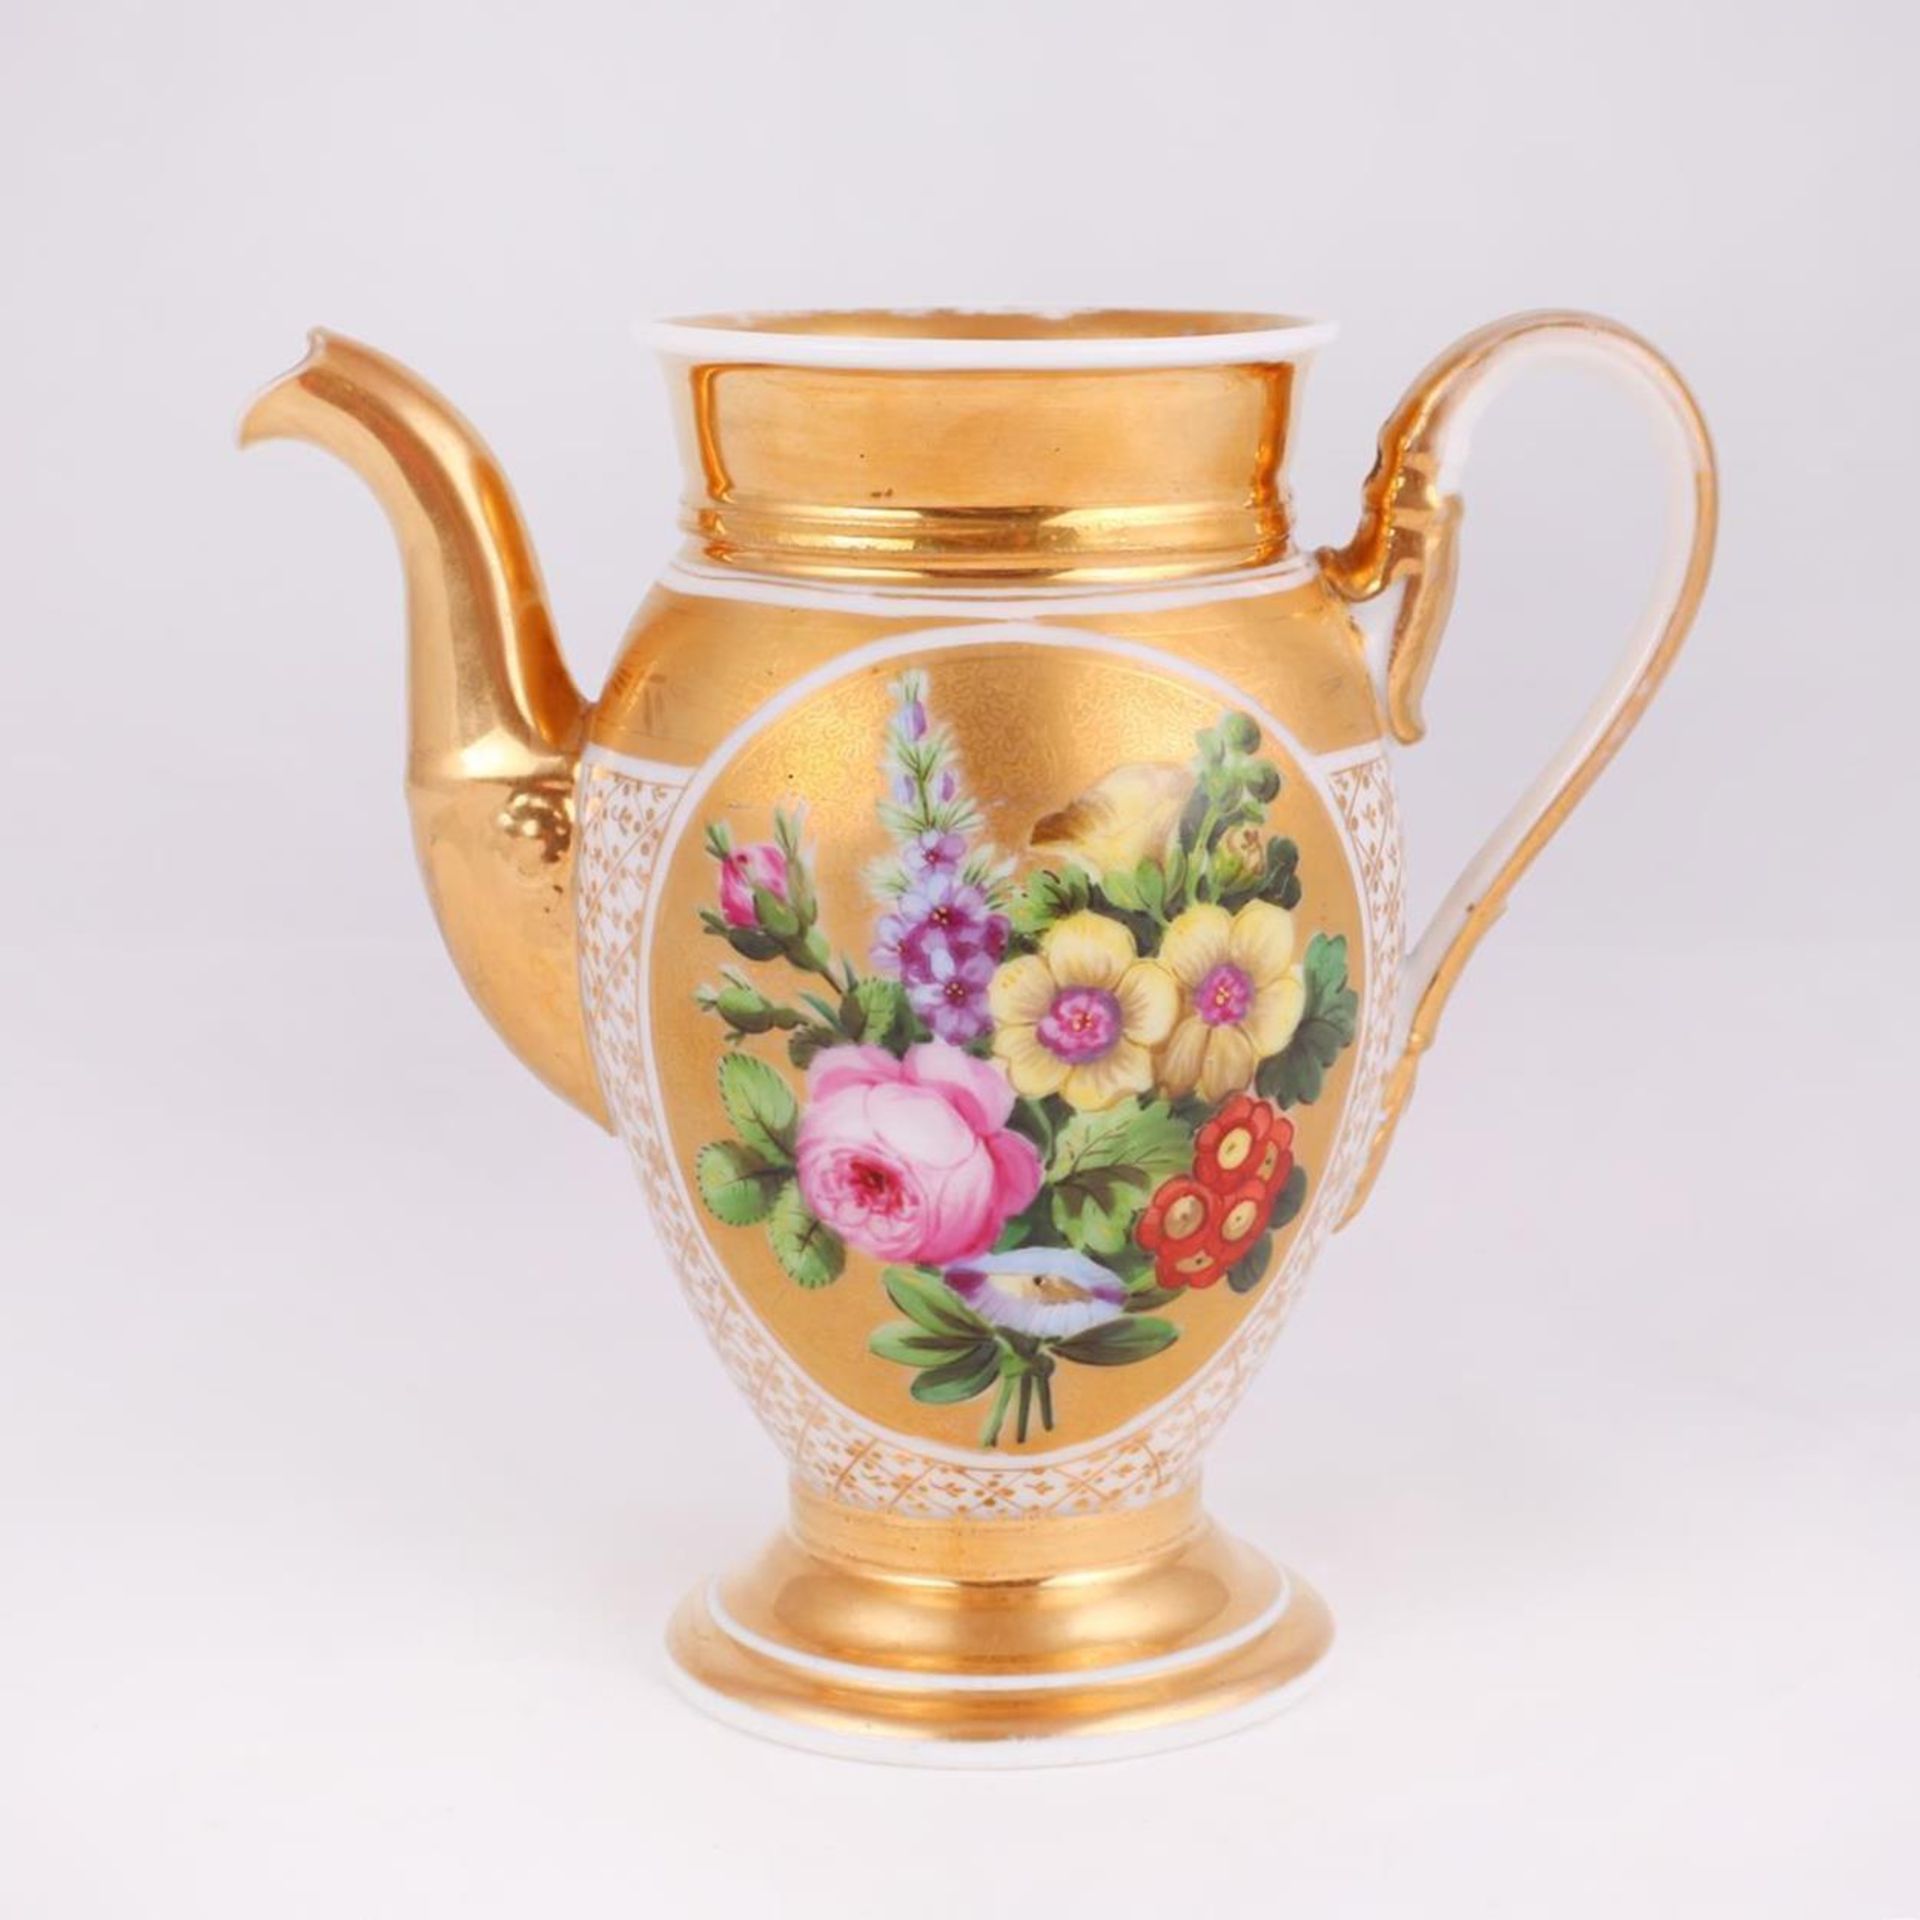 Teapot with the floral painting. [Popov].Popov Factory. 1830s. Porcelain, gilding, painting. - Image 2 of 7